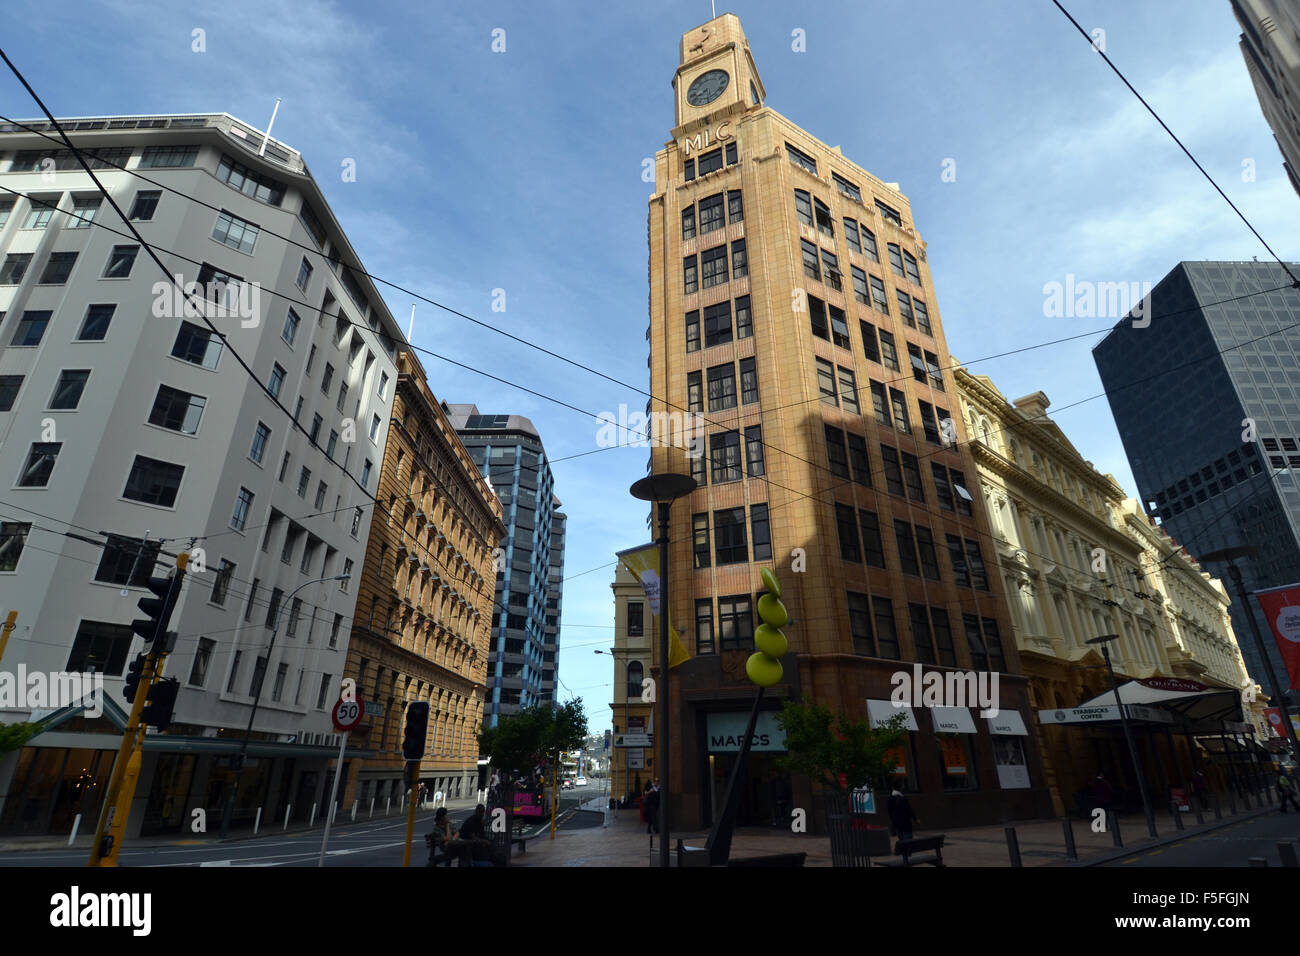 Historical buildings in downtown Wellington, North Island, New Zealand Stock Photo